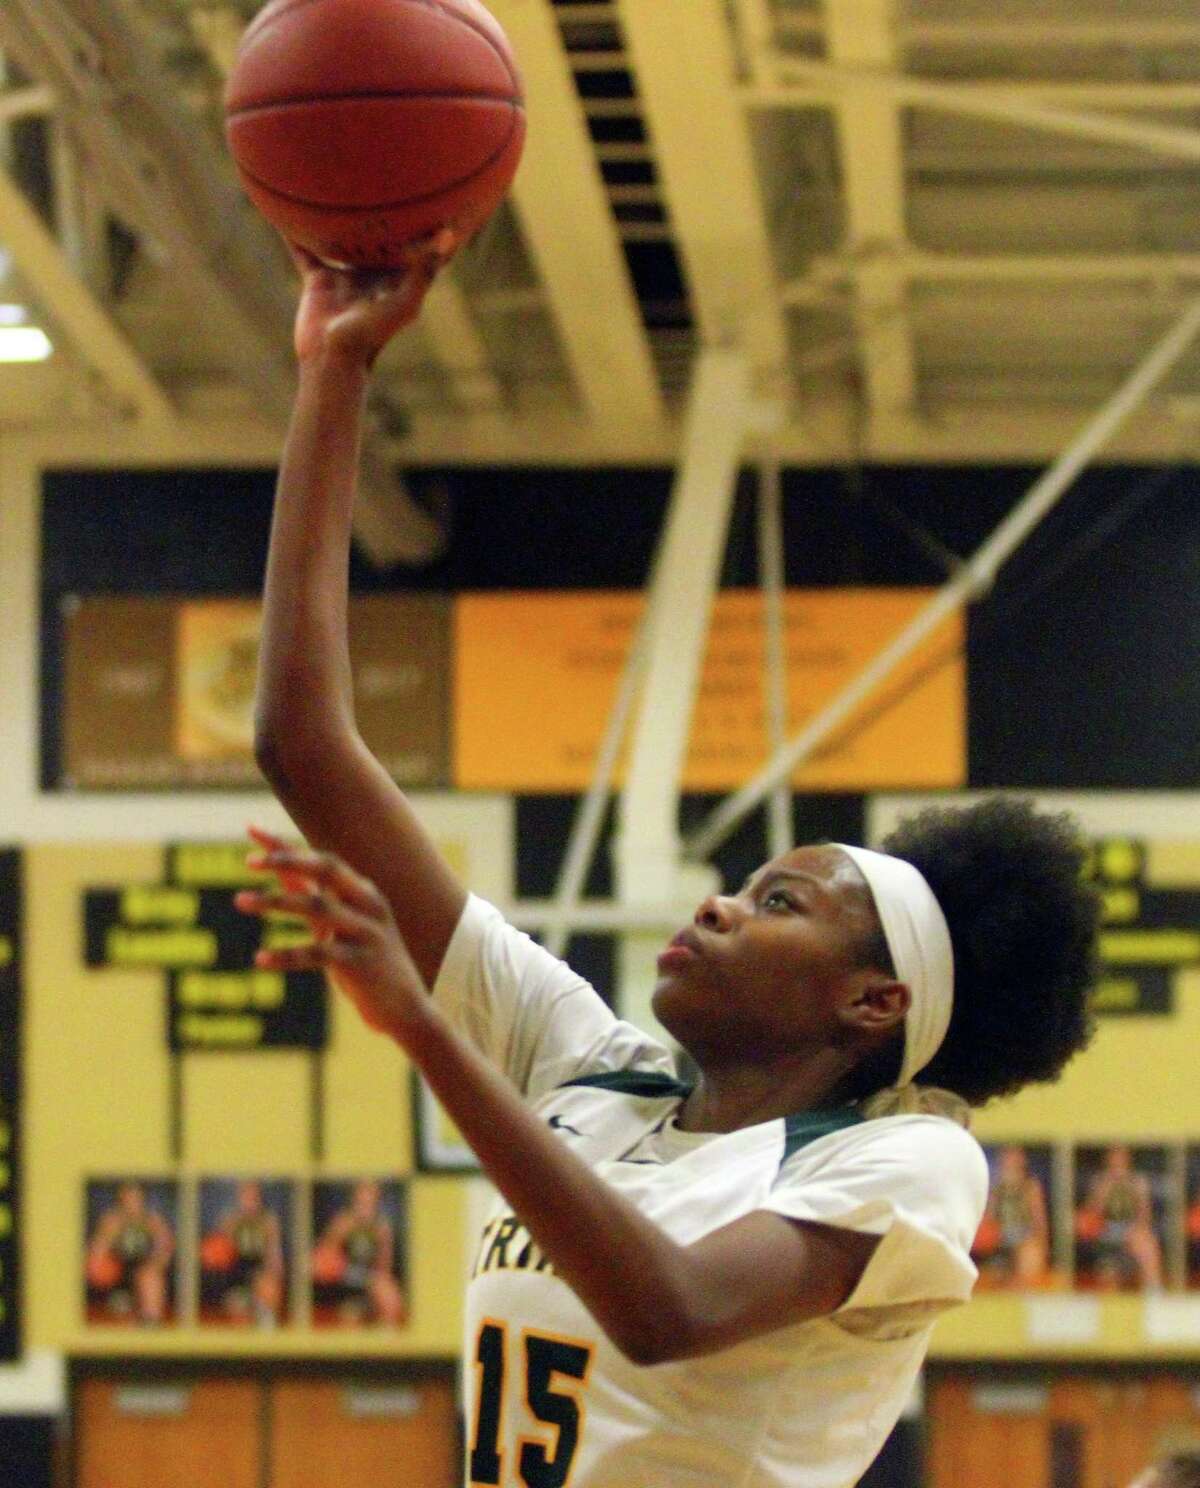 Trinity Catholic’s Iyanna Lops had 29 points, 16 rebounds and 8 blocks in Tuesday’s FCIAC semifinal win over Ridgefield.